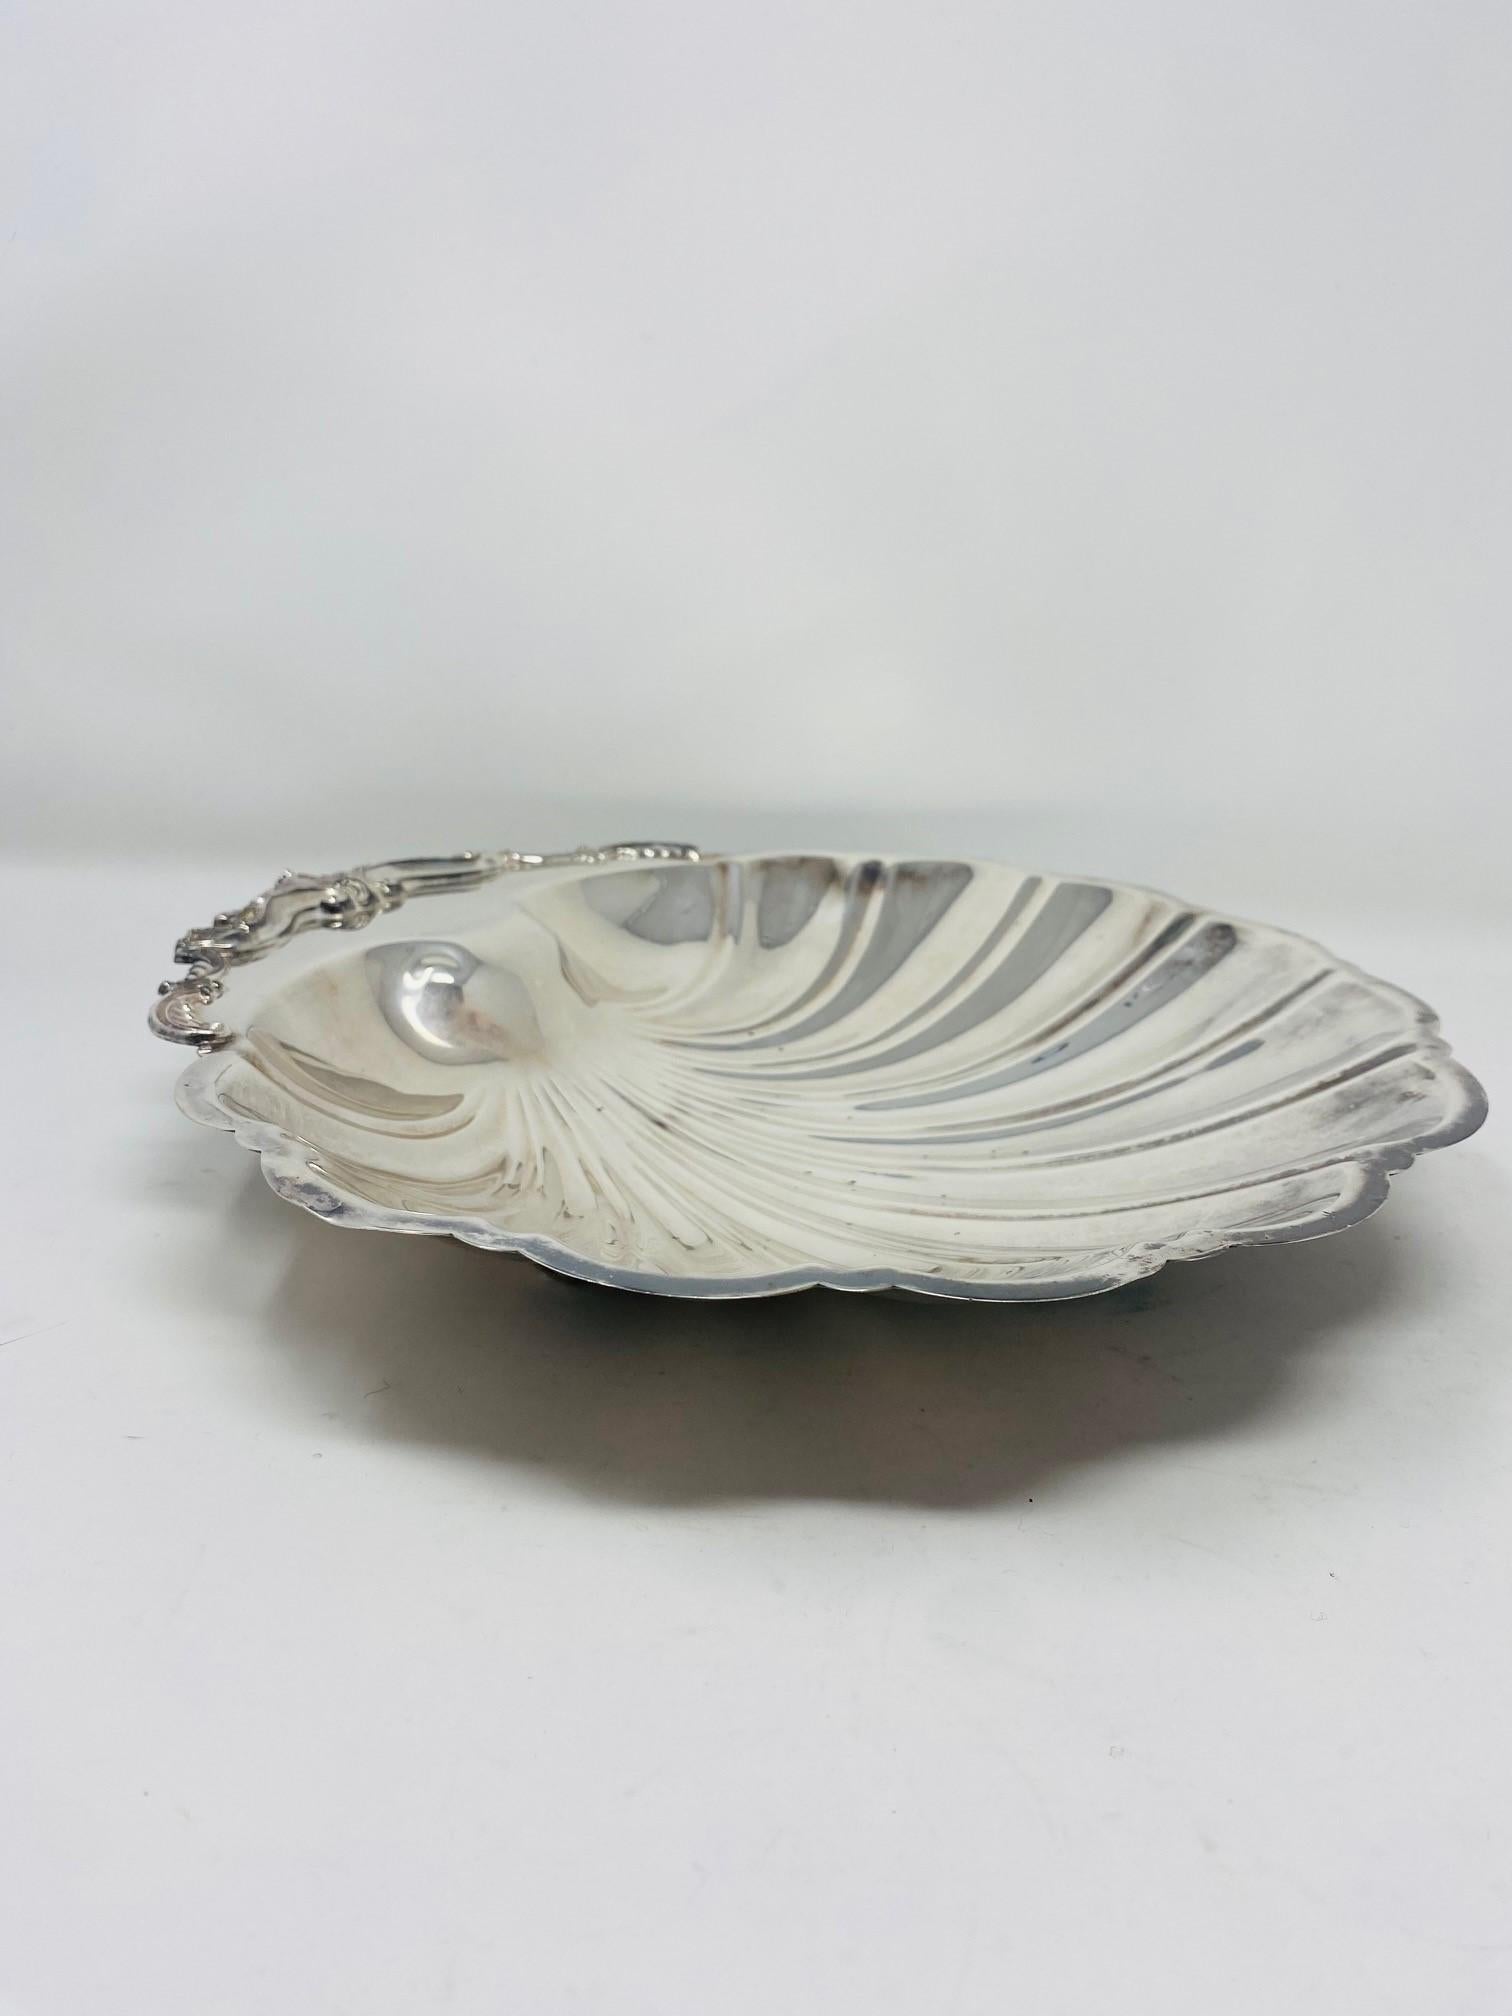 Antique FB Rogers Silver Co 1824 Silver Plated Footed Shell Dish 3